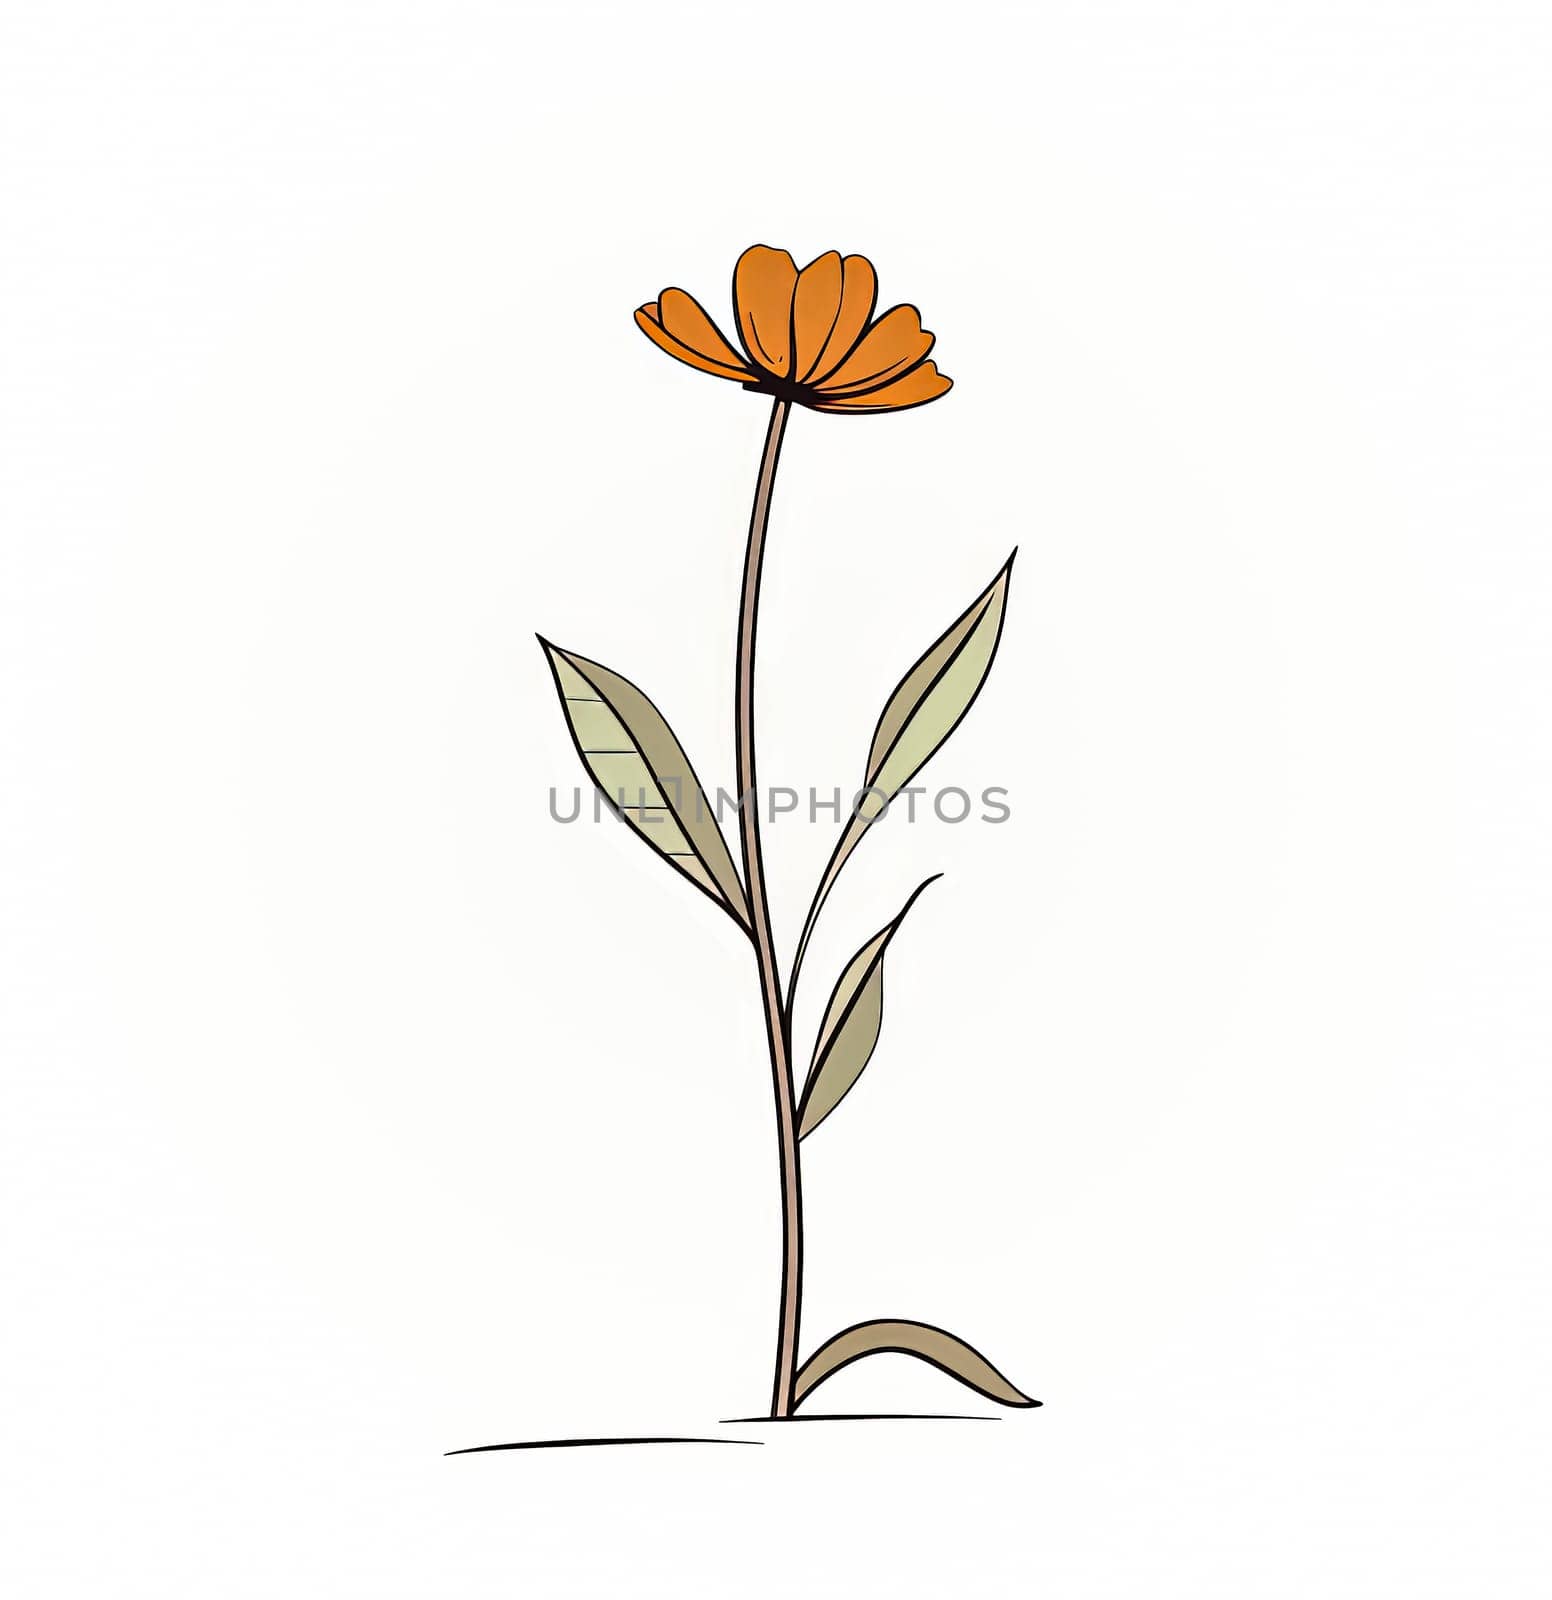 Minimalistic floral botanical line art featuring bouquets of wild and garden plants, branches, leaves, flowers, and herbs. Ideal for logos, tattoos, invitations, and cards.